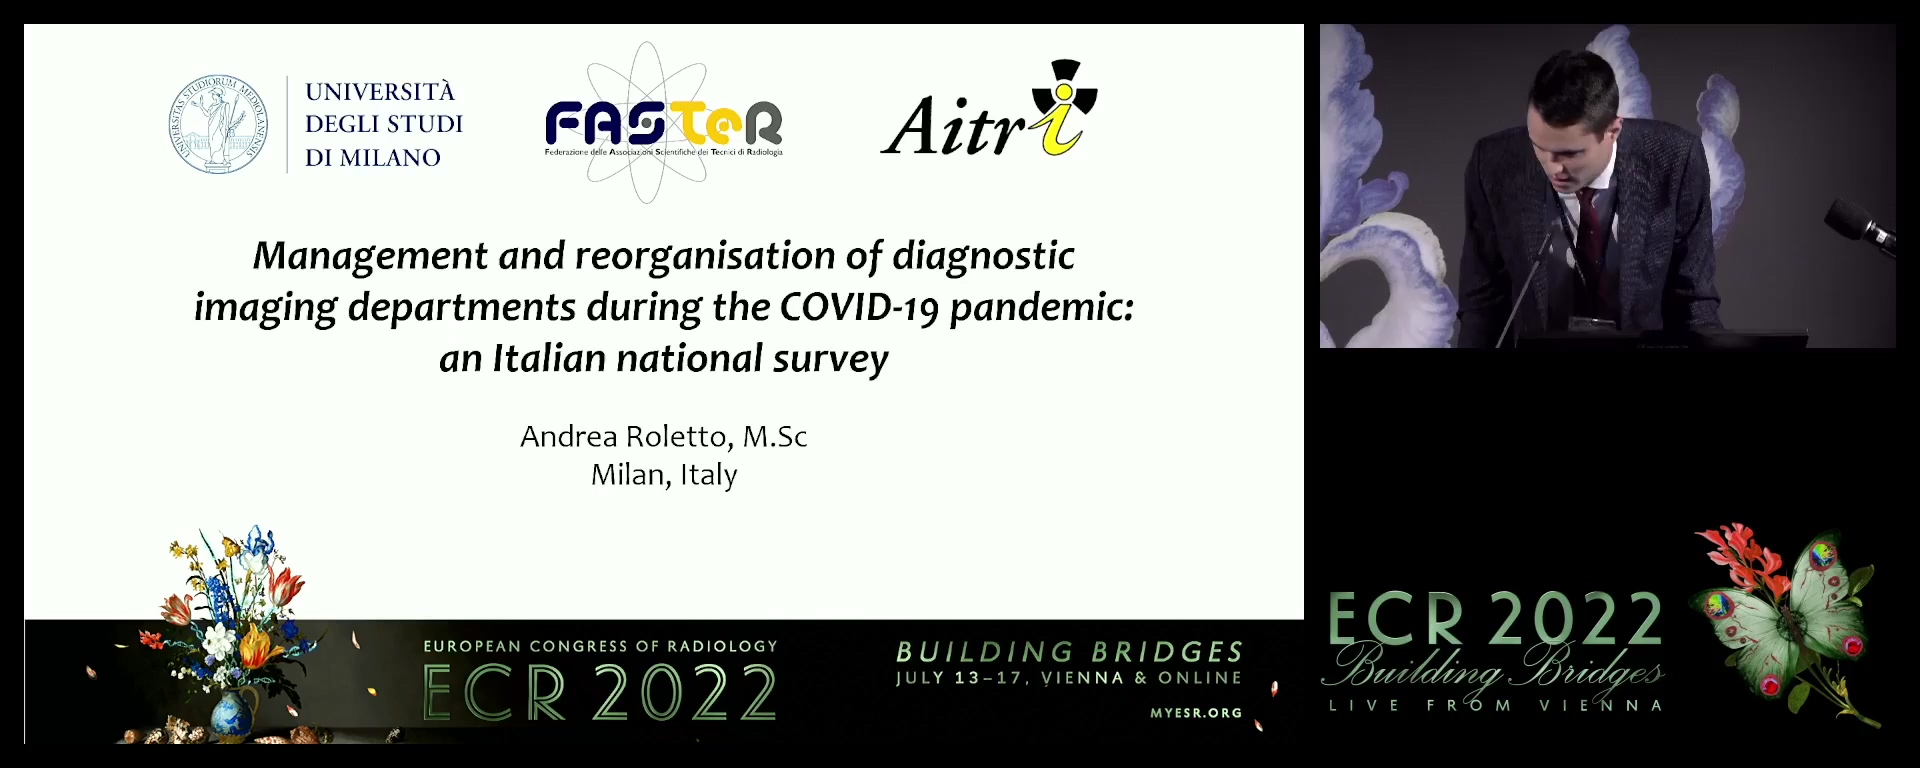 Management and reorganisation of diagnostic imaging departments during the COVID-19 pandemic: an Italian national survey - Andrea Roletto, Milan / IT